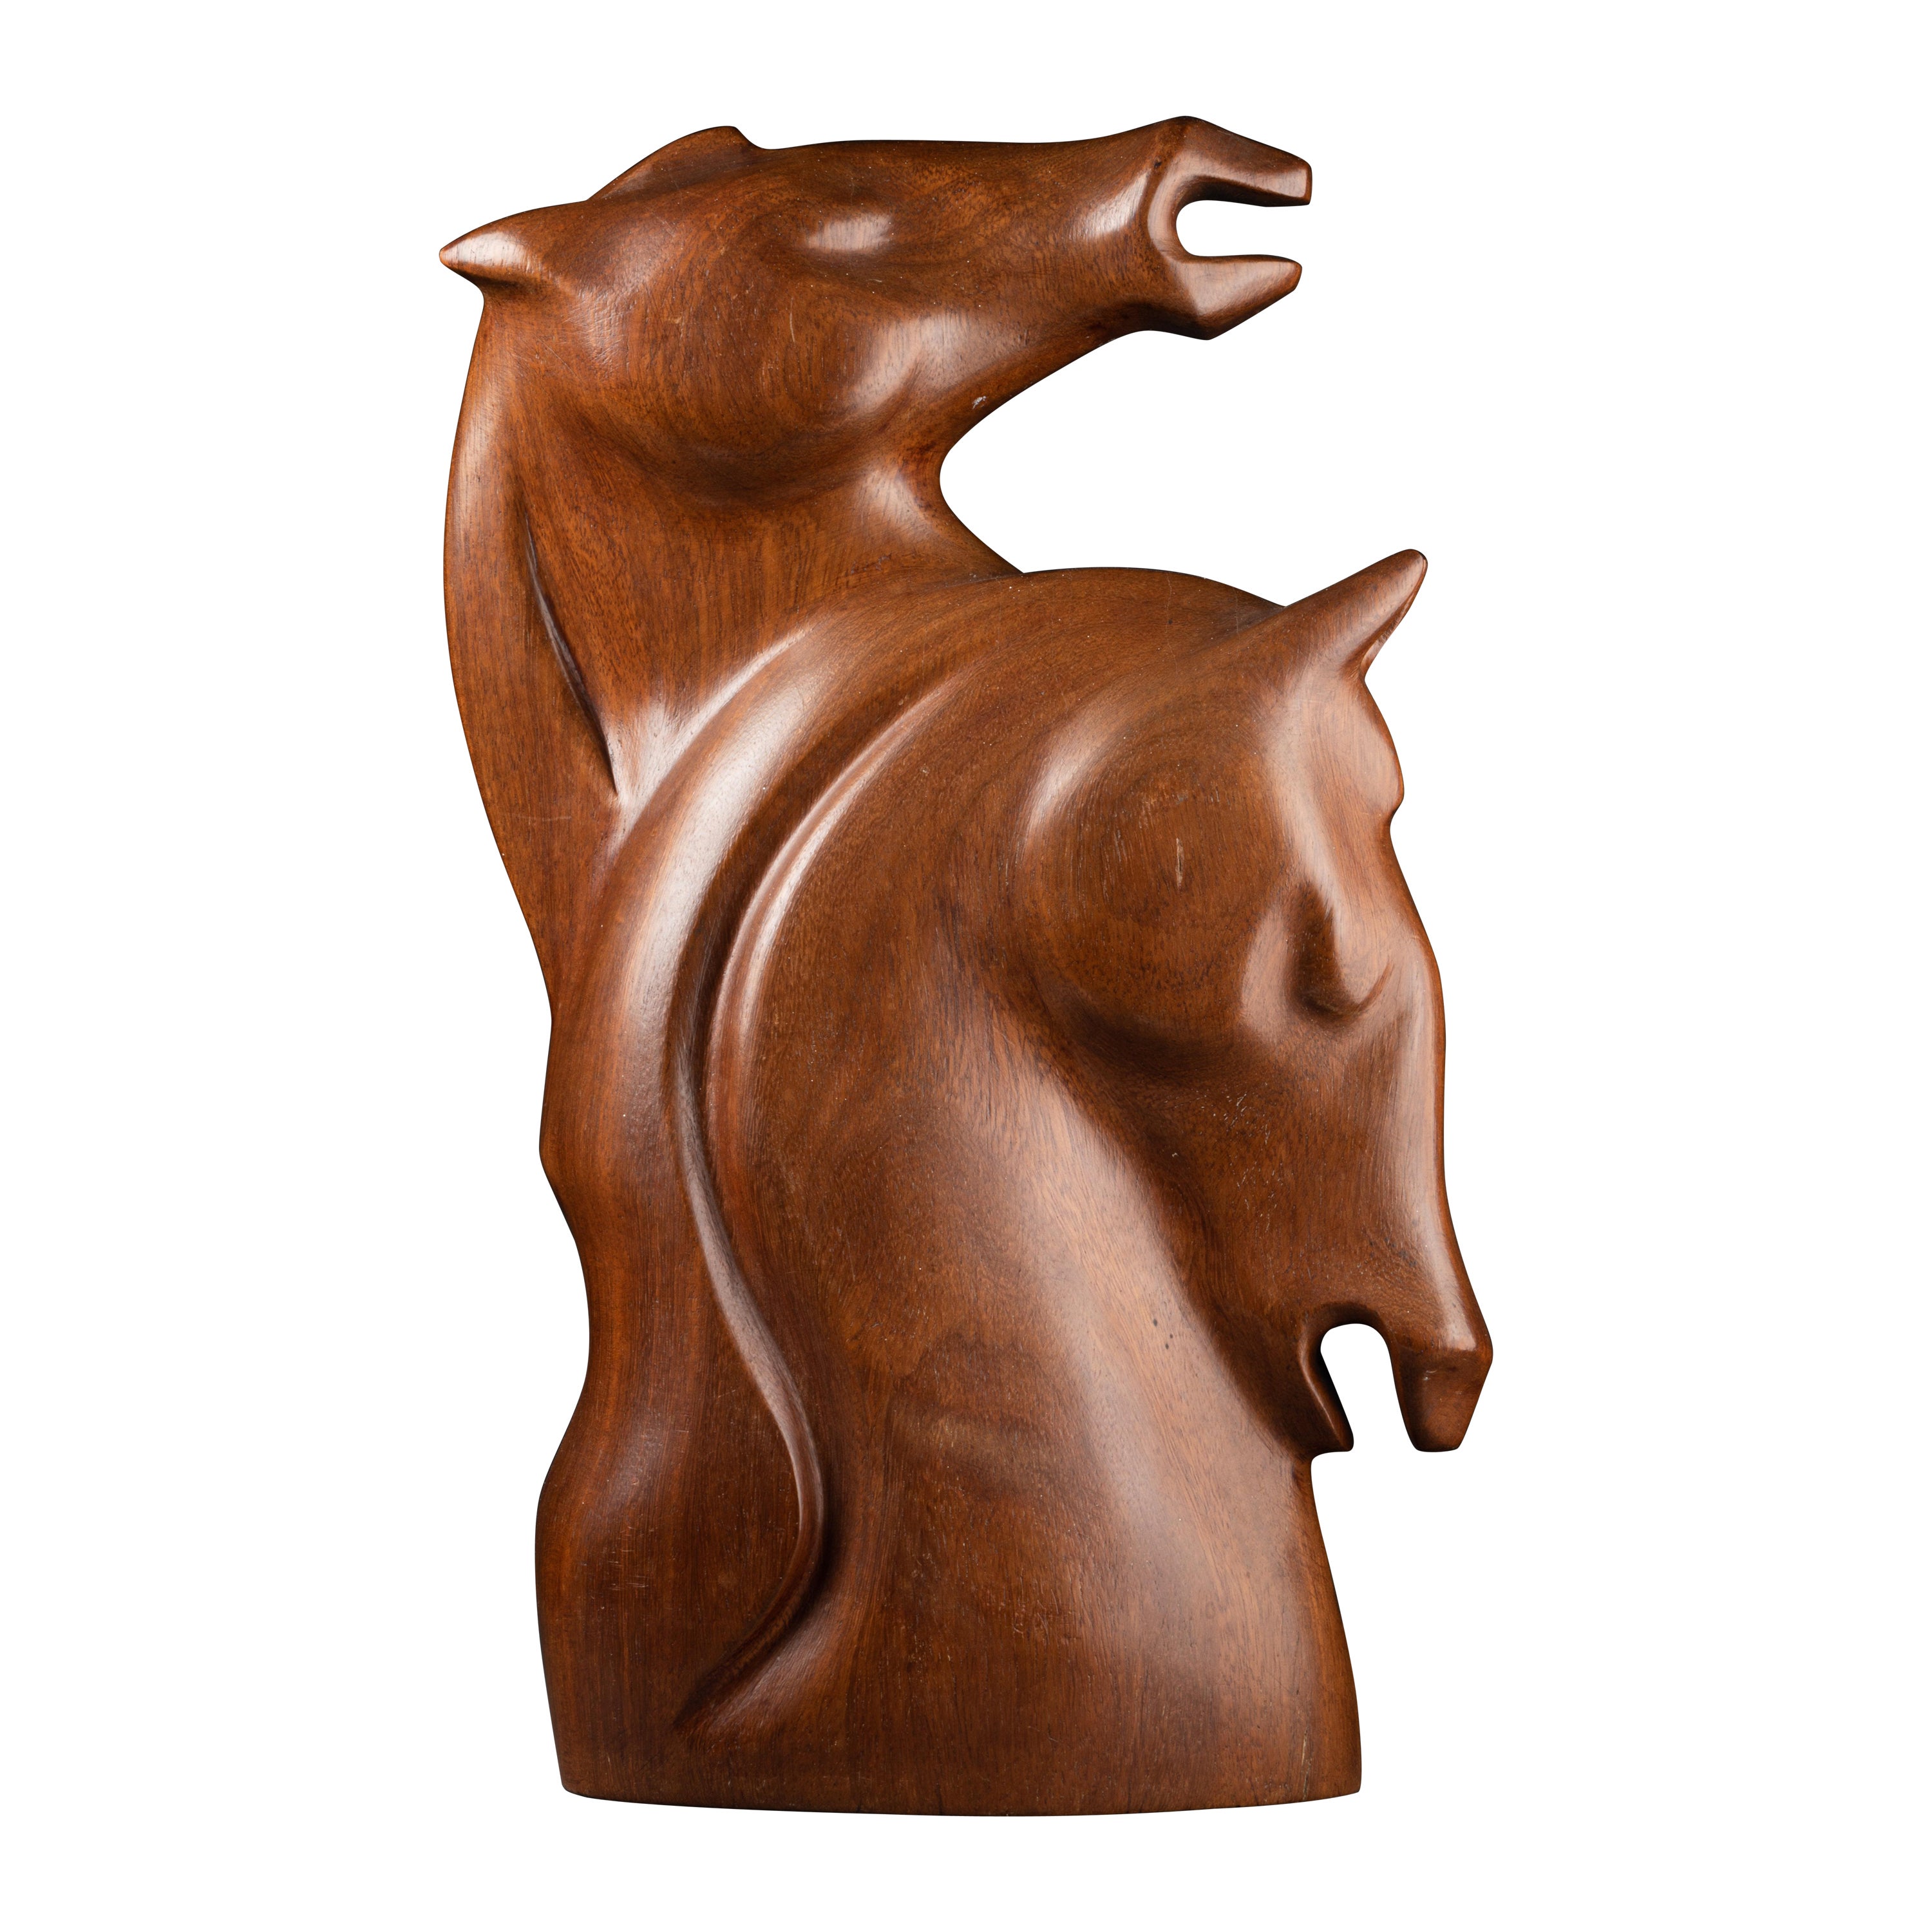 Max Meder (1937-) : "Couple of horses bust", wood sculpture C.